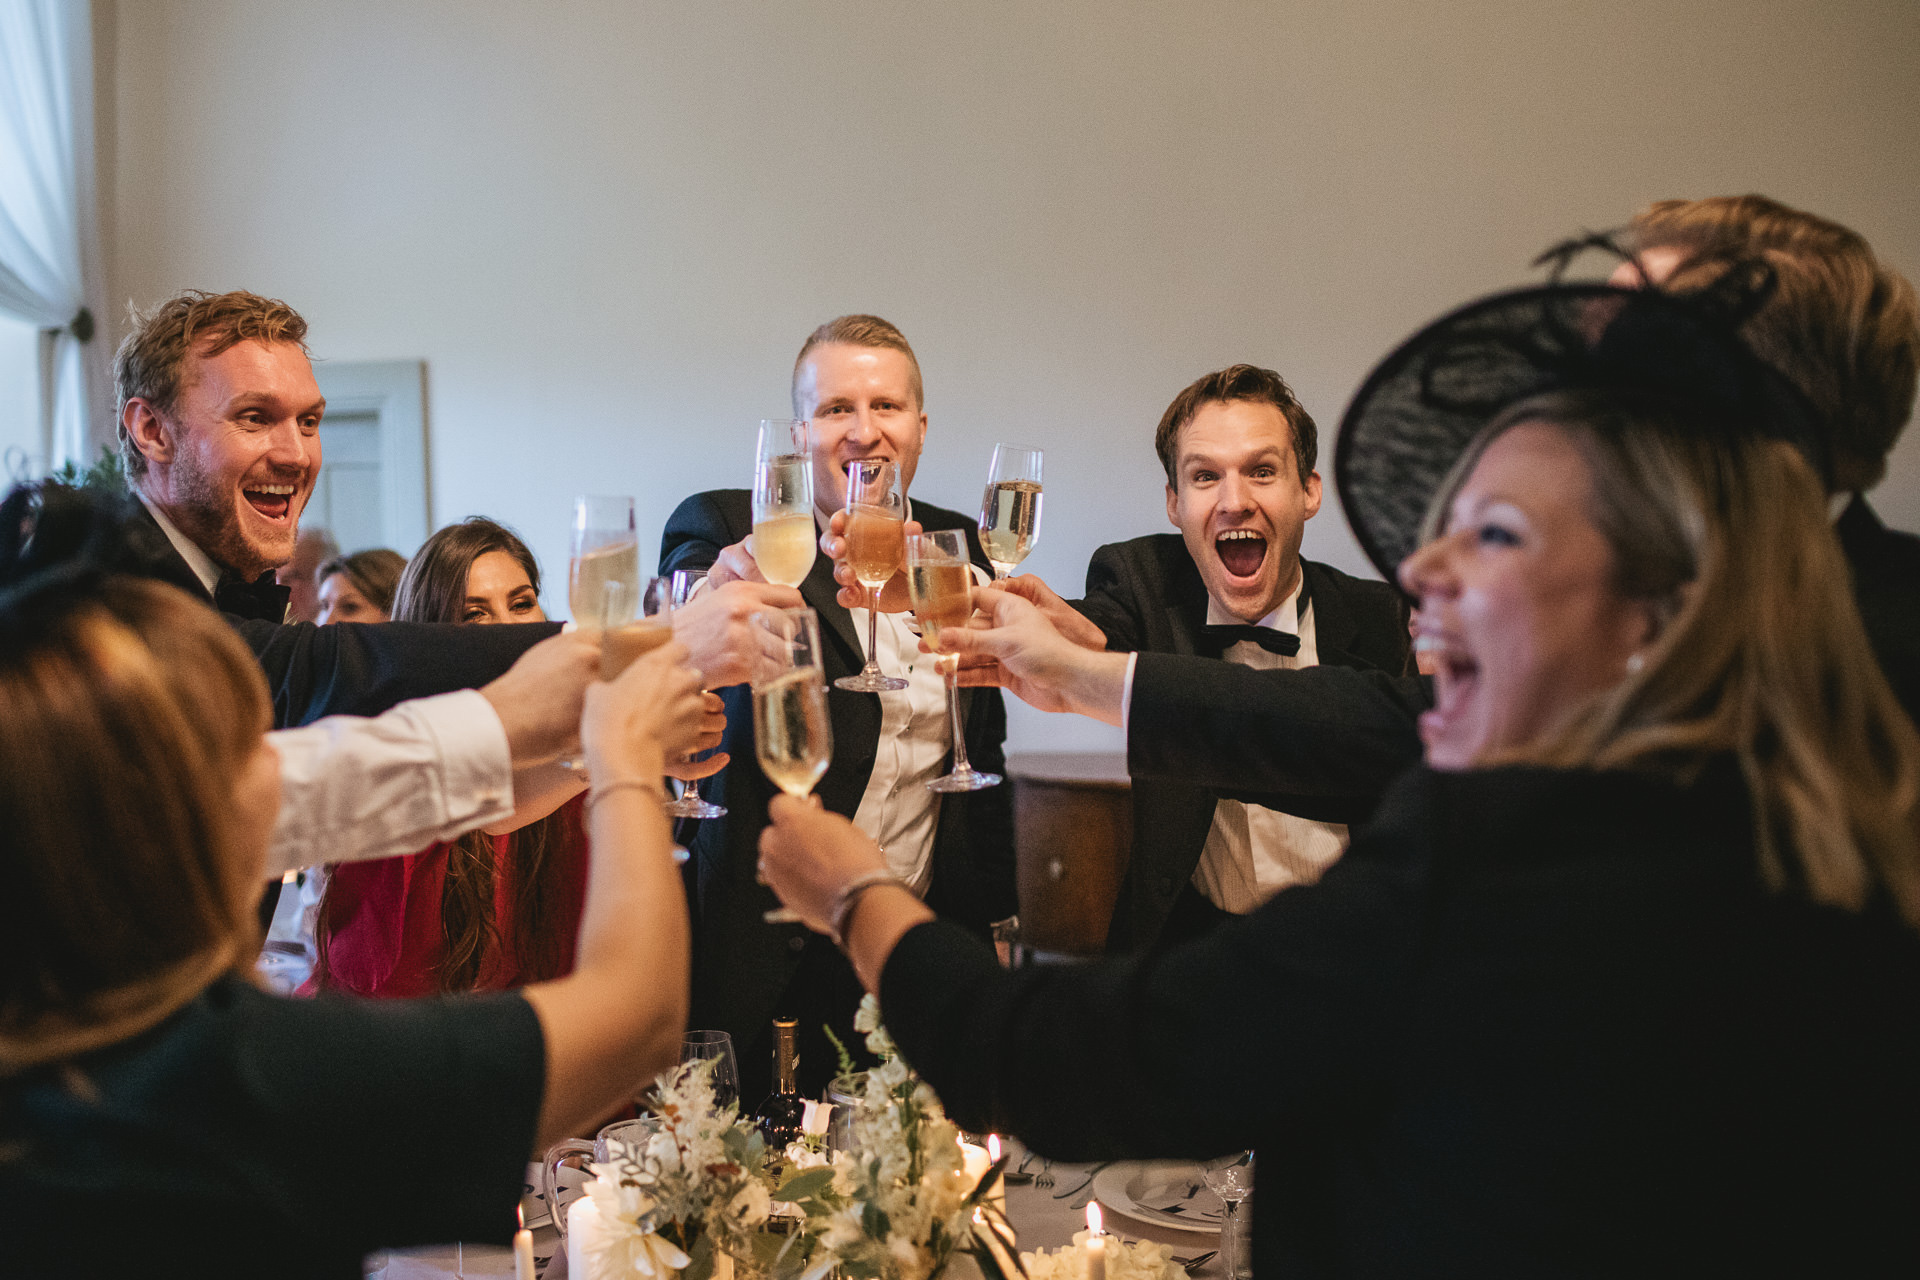 Wedding guests around a table toasting with glasses